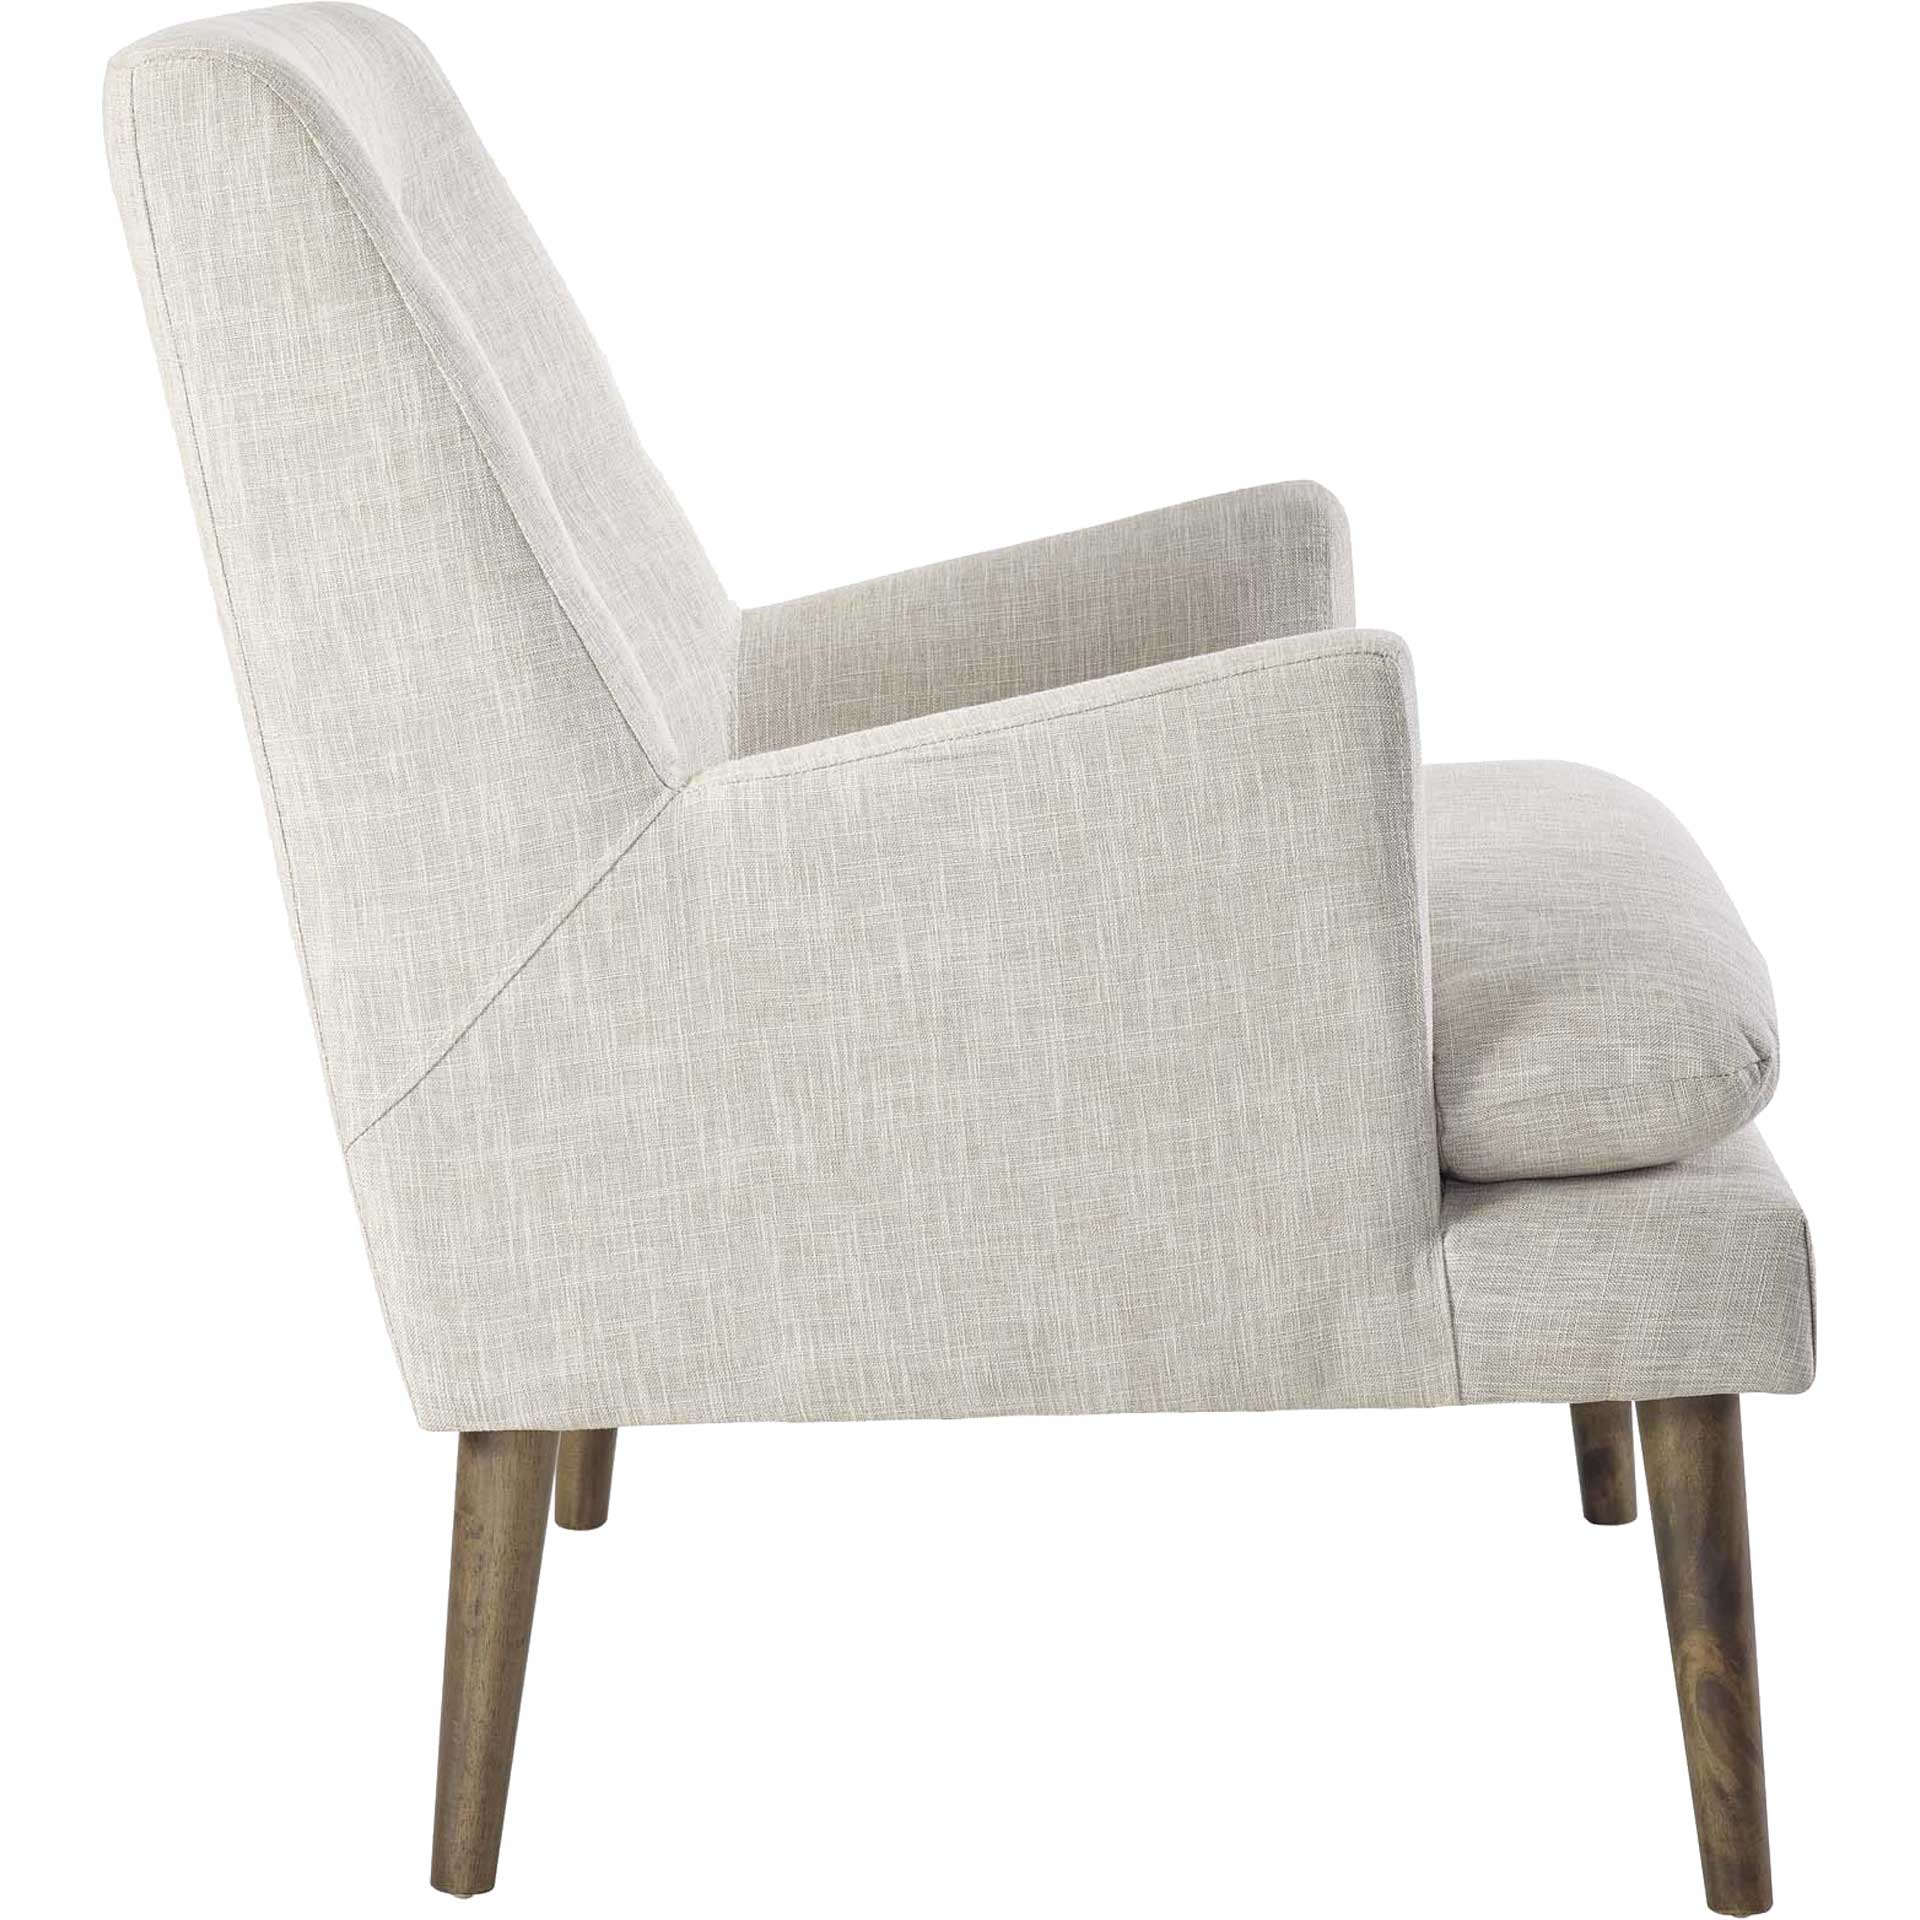 Lucas Upholstered Lounge Chair Beige